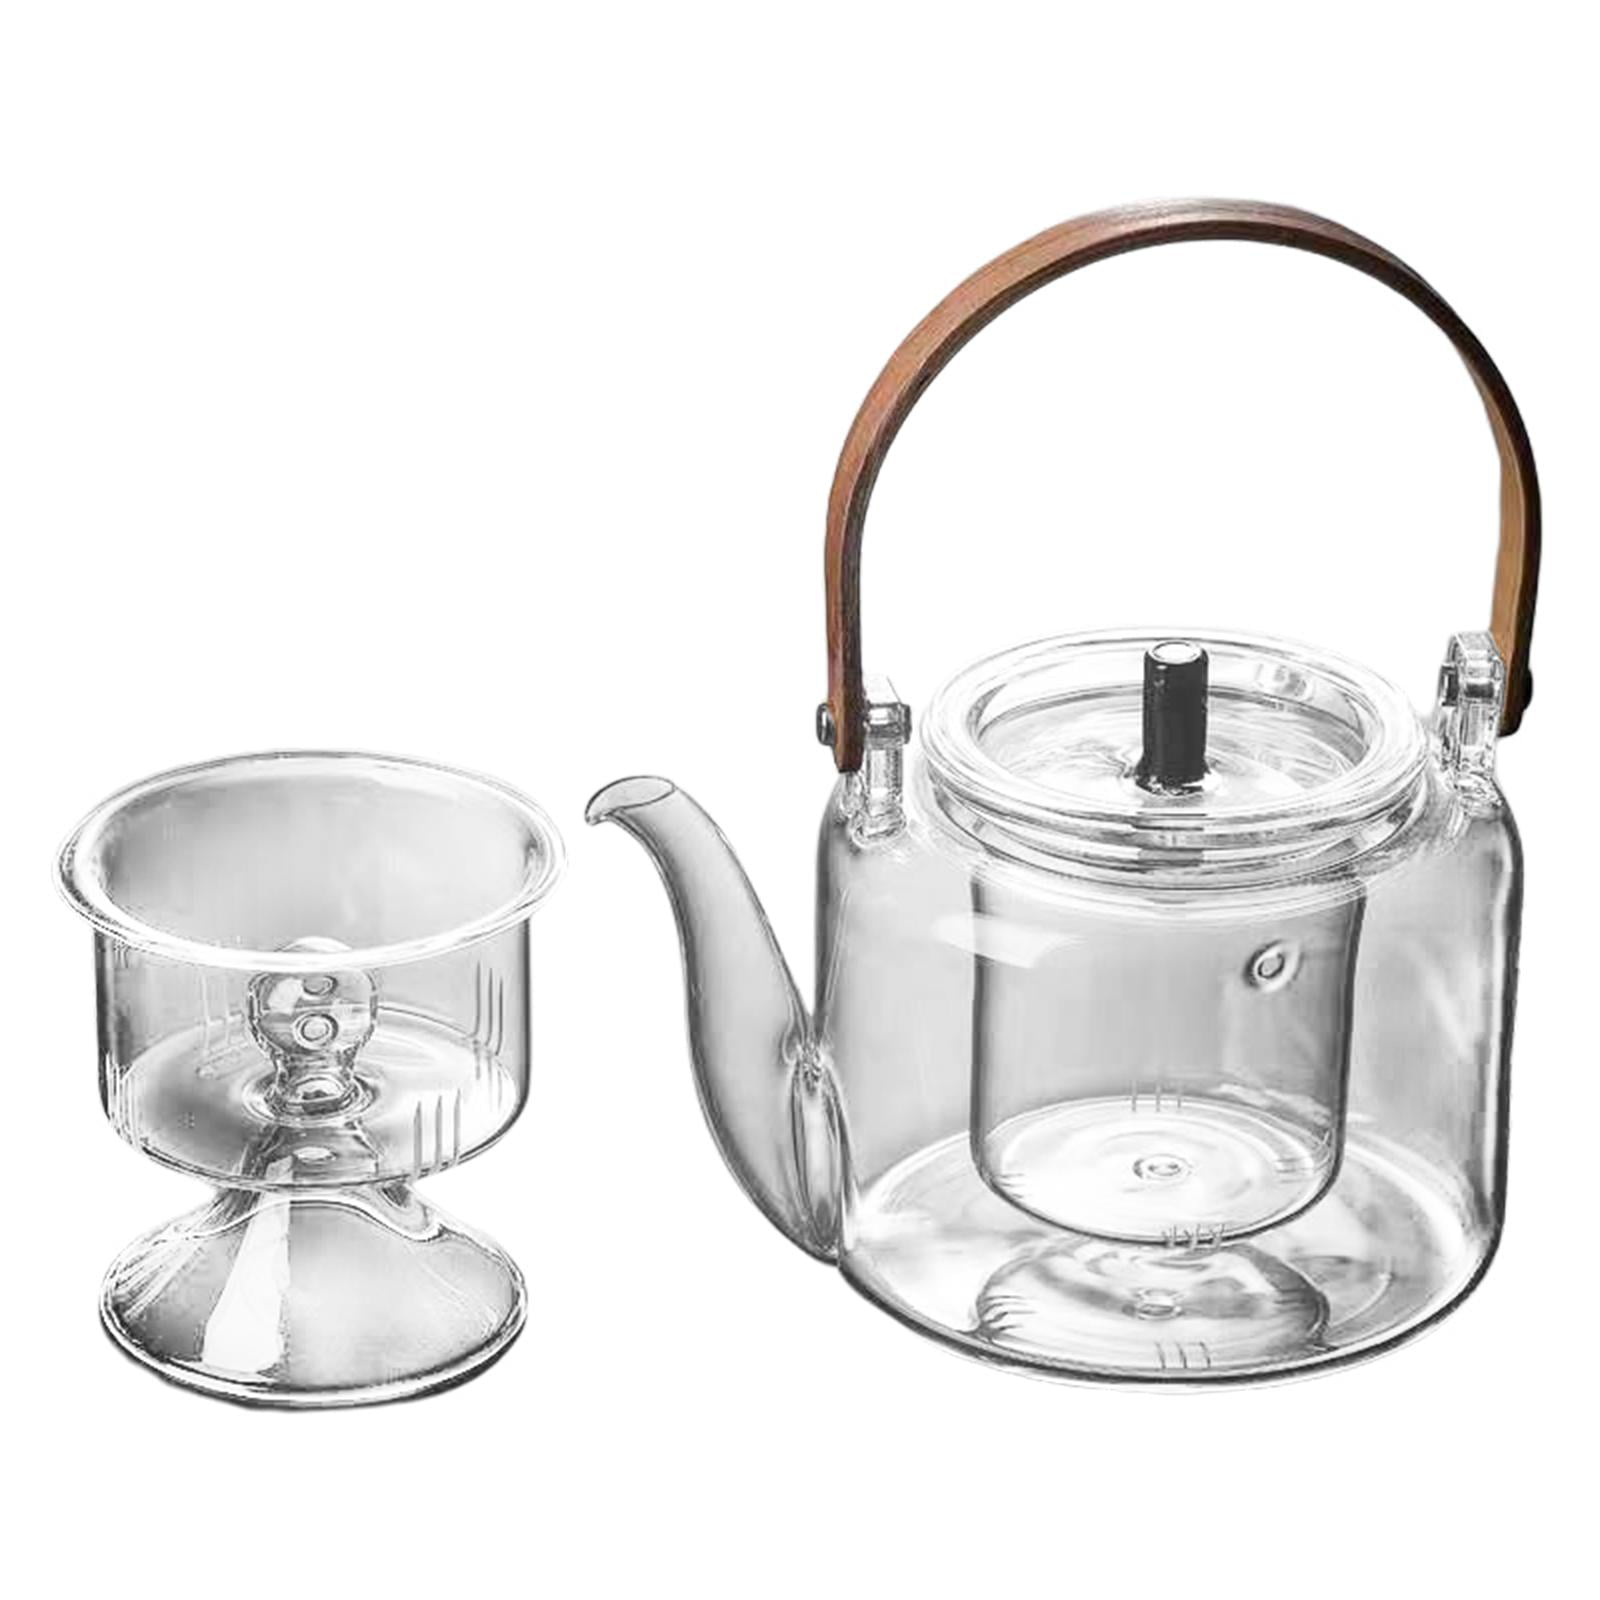 1000ml Glass Teapot Tea Pot Coffee Kettle With Bamboo Handle Japanese Style 